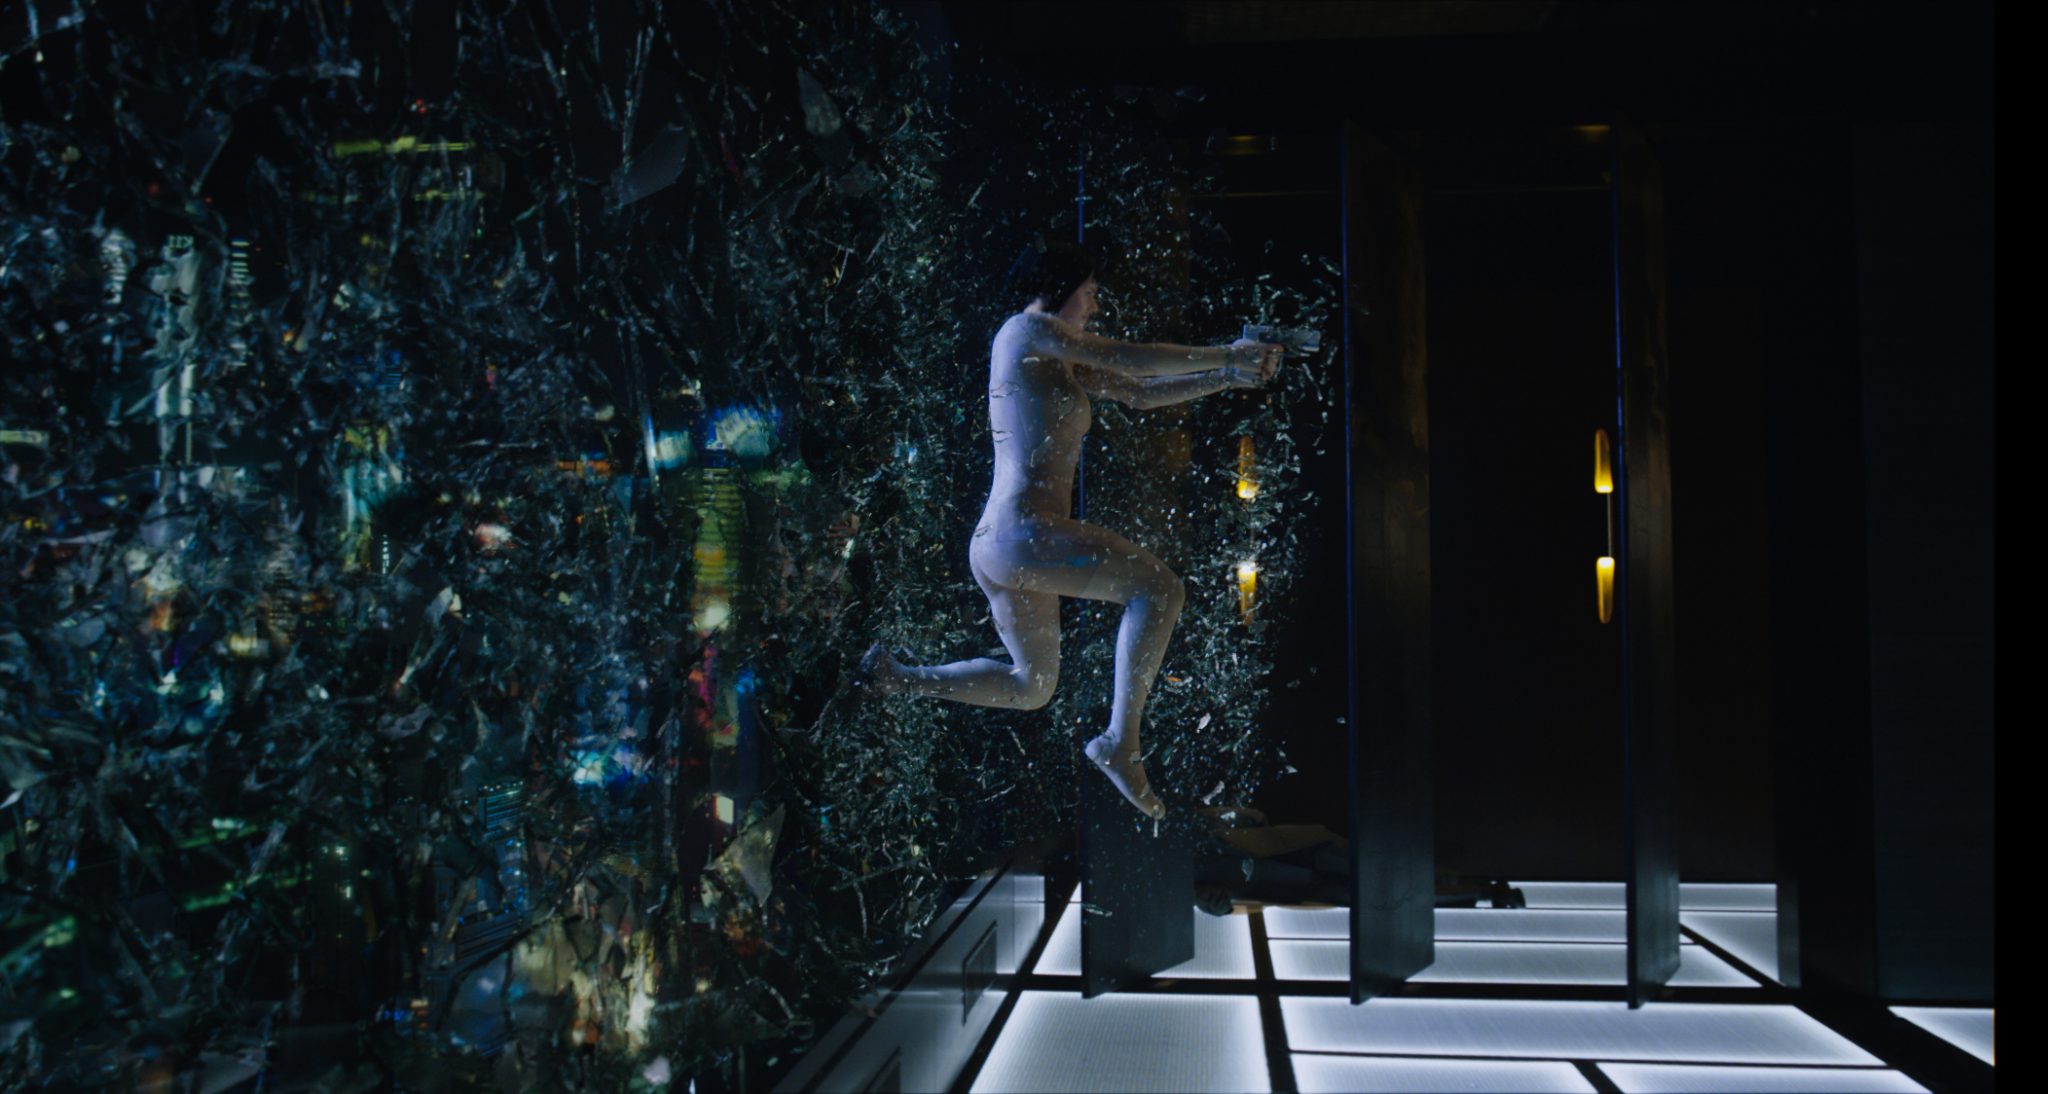 Ghost in the shell film